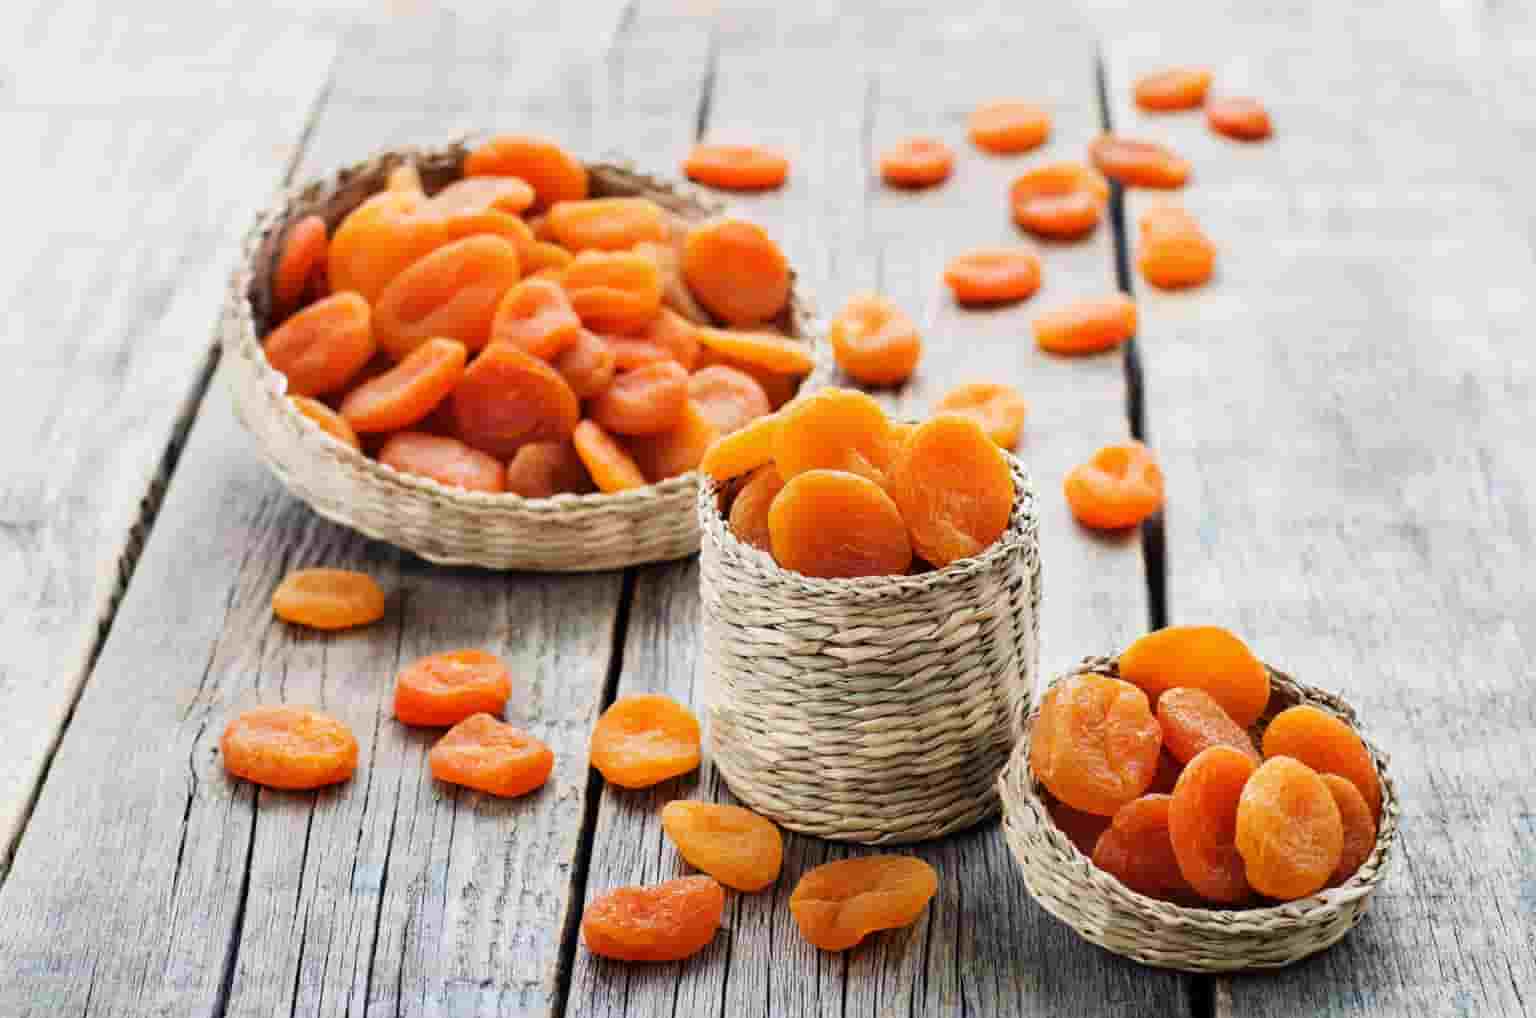 Introduction of dried apricot